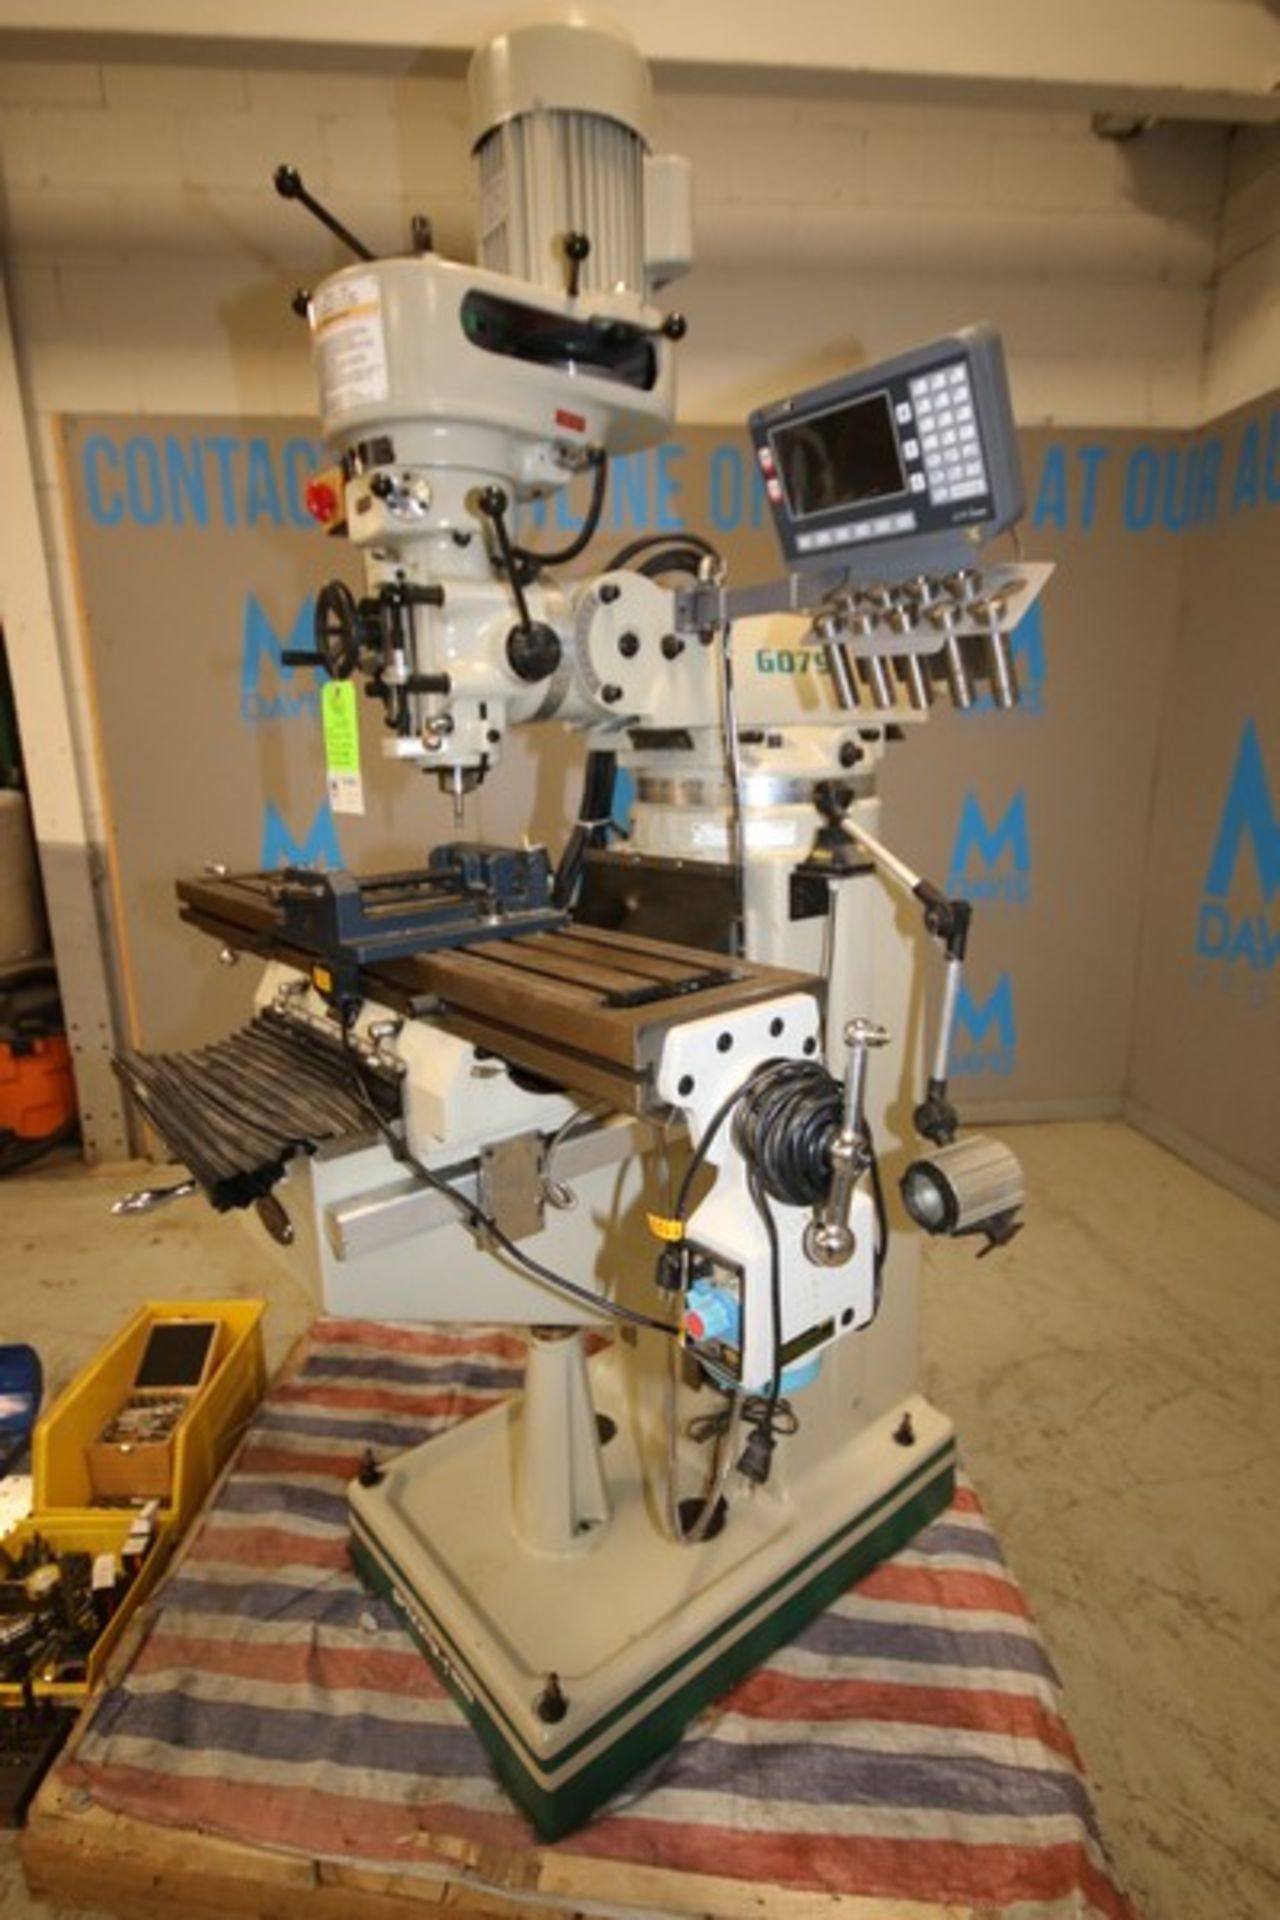 2021 Grizzly 9" x 49" Vertical Milling Machine, Model G0796, SN A200492, with Goxh LCD i500 Touch - Bild 5 aus 13